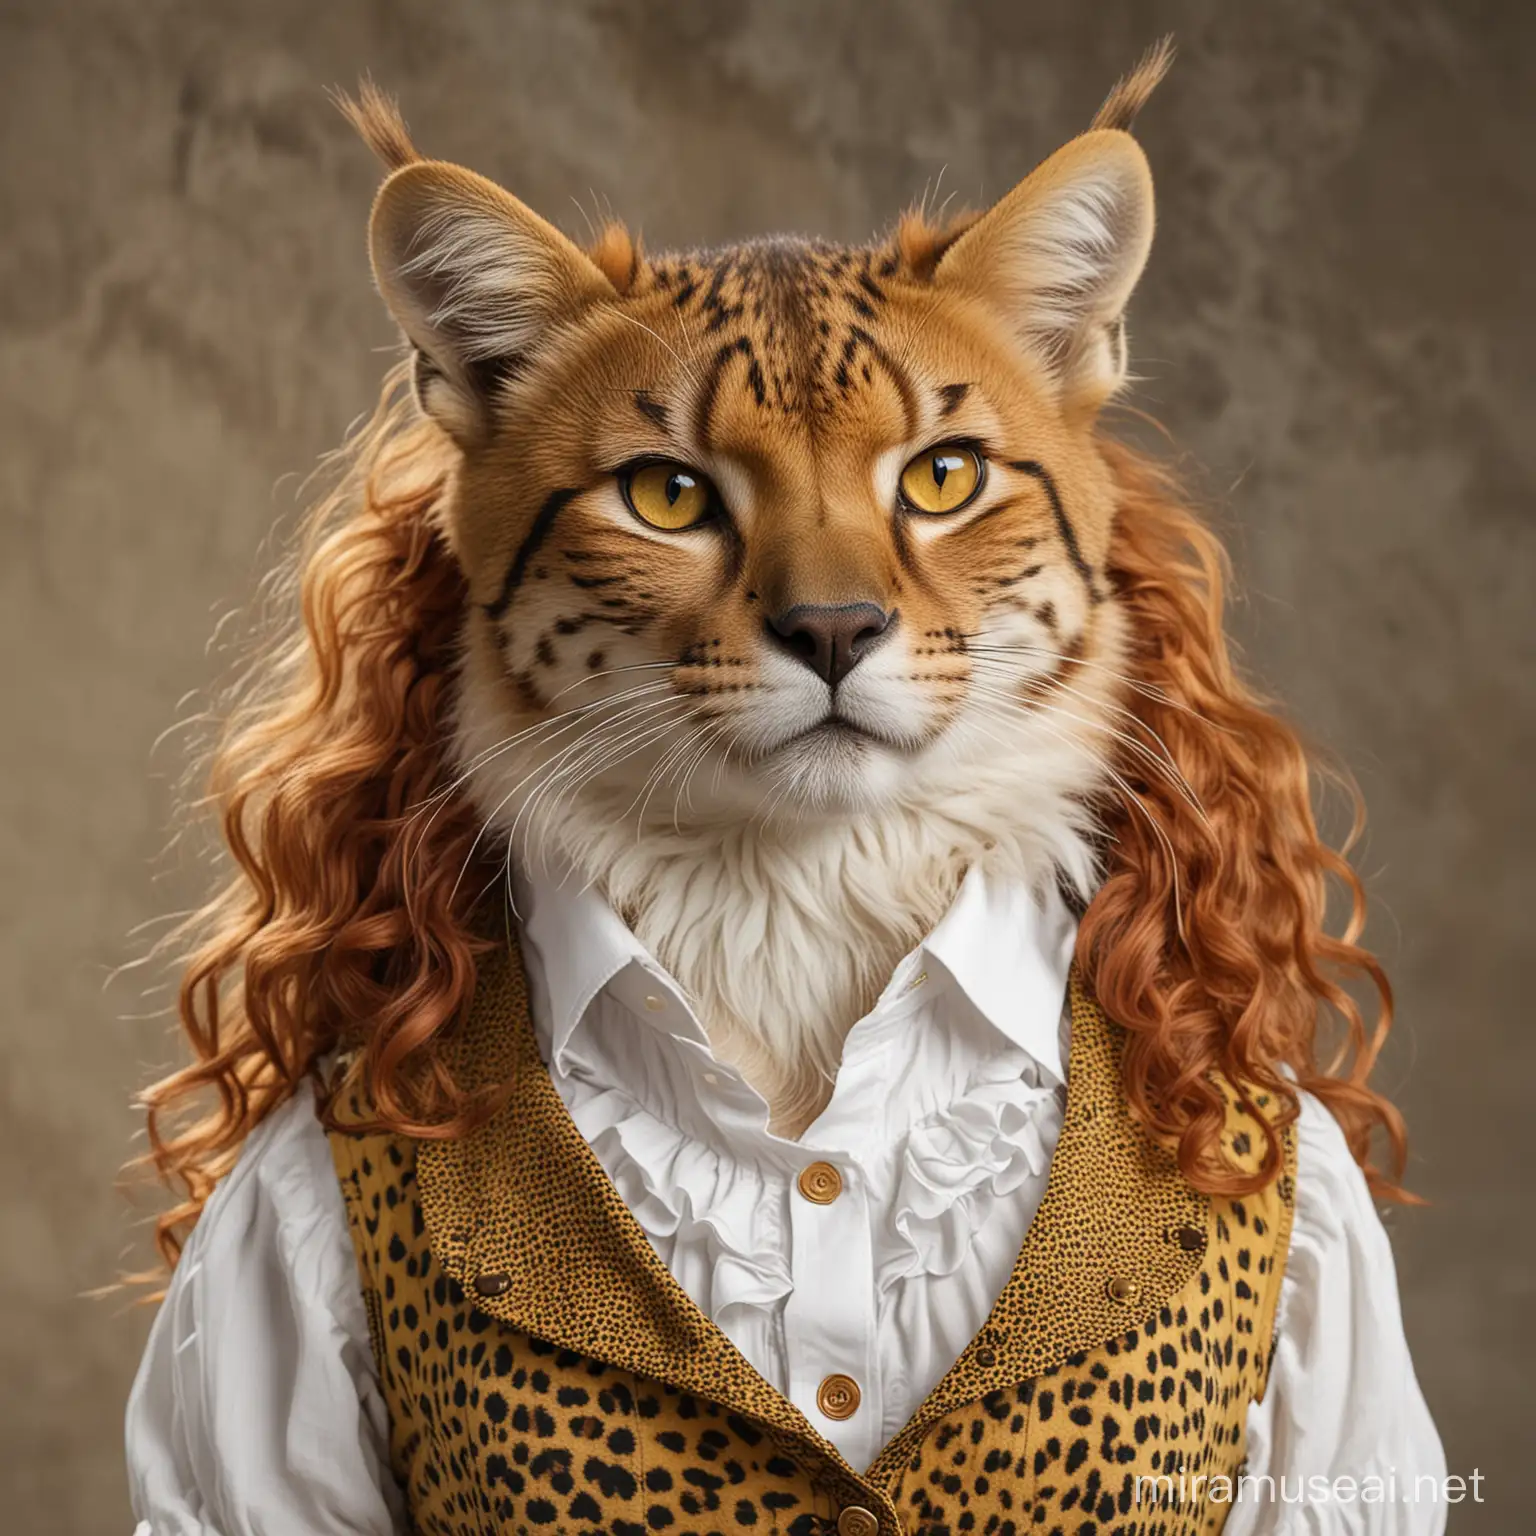 female Tabaxi with cheetah spots. She has long, thick, wavy red hair, yellow eyes. She is wearing a white ruffled shirt and a brown waistcoat.